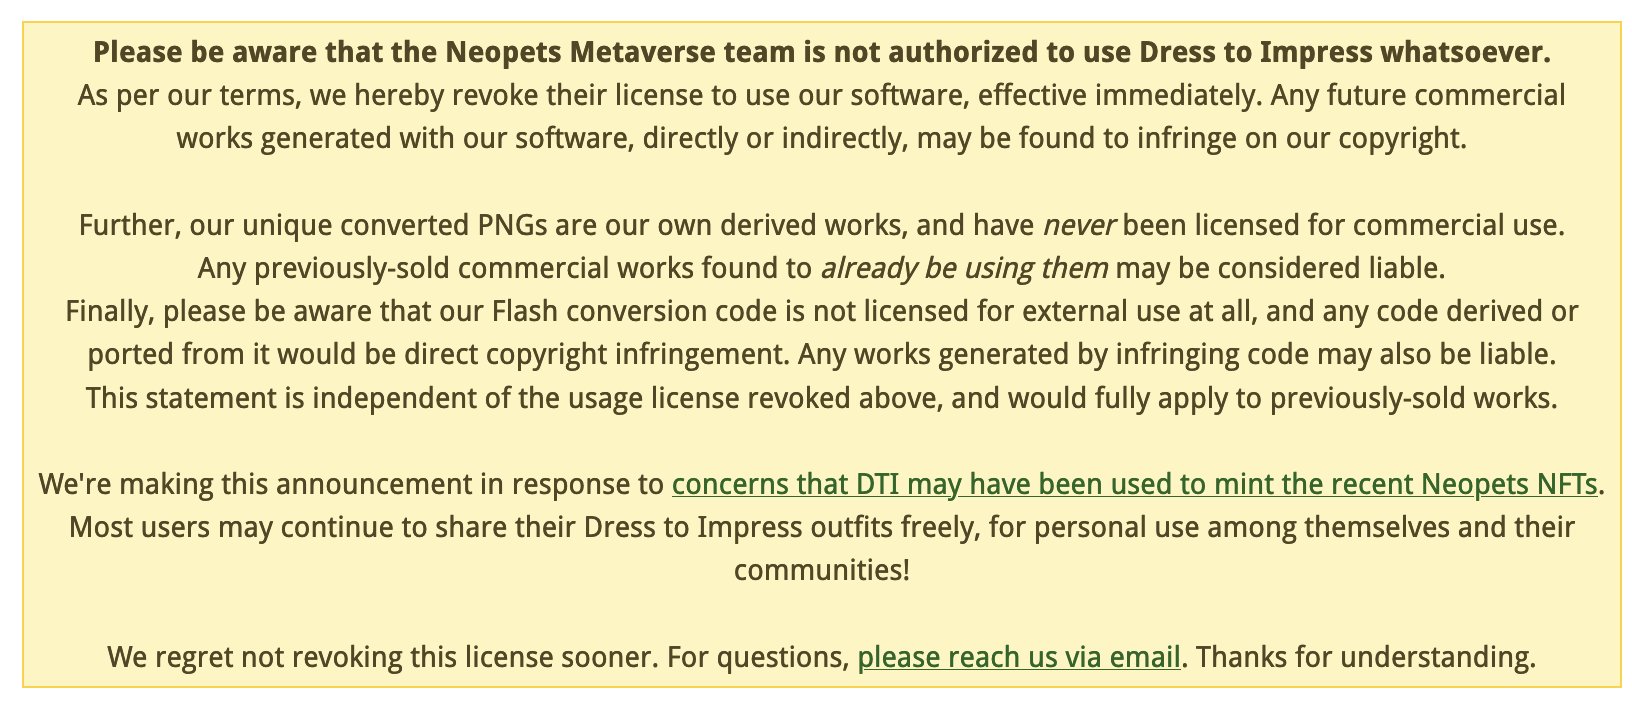 Please be aware that the Neopets Metaverse team is not authorized to use Dress to Impress whatsoever.
As per our terms, we hereby revoke their license to use our software, effective immediately. Any future commercial works generated with our software, directly or indirectly, may be found to infringe on our copyright.

Further, our unique converted PNGs are our own derived works, and have never been licensed for commercial use.
Any previously-sold commercial works found to already be using them may be considered liable.
Finally, please be aware that our Flash conversion code is not licensed for external use at all, and any code derived or ported from it would be direct copyright infringement. Any works generated by infringing code may also be liable.
This statement is independent of the usage license revoked above, and would fully apply to previously-sold works.

We're making this announcement in response to concerns that DTI may have been used to mint the recent <…alt text char limit…>